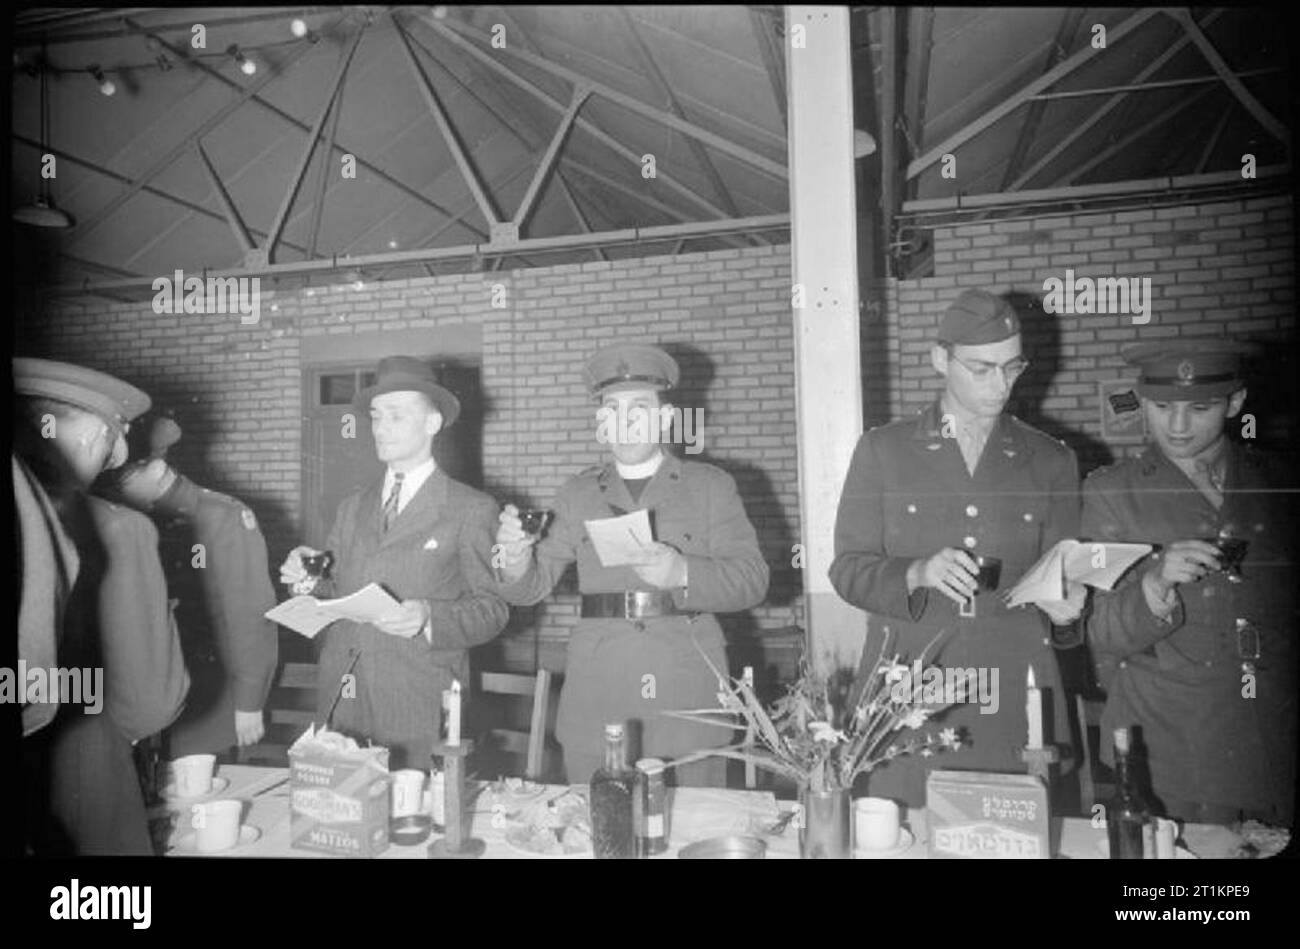 Allied Forces Celebrate Passover- Jewish Traditions in Wartime Britain, April 1944 The Jewish Chaplain to the Forces (centre) raises his glass as he speaks to members of the Allied Forces during their Passover meal in a large hall, somewhere near London. Stock Photo